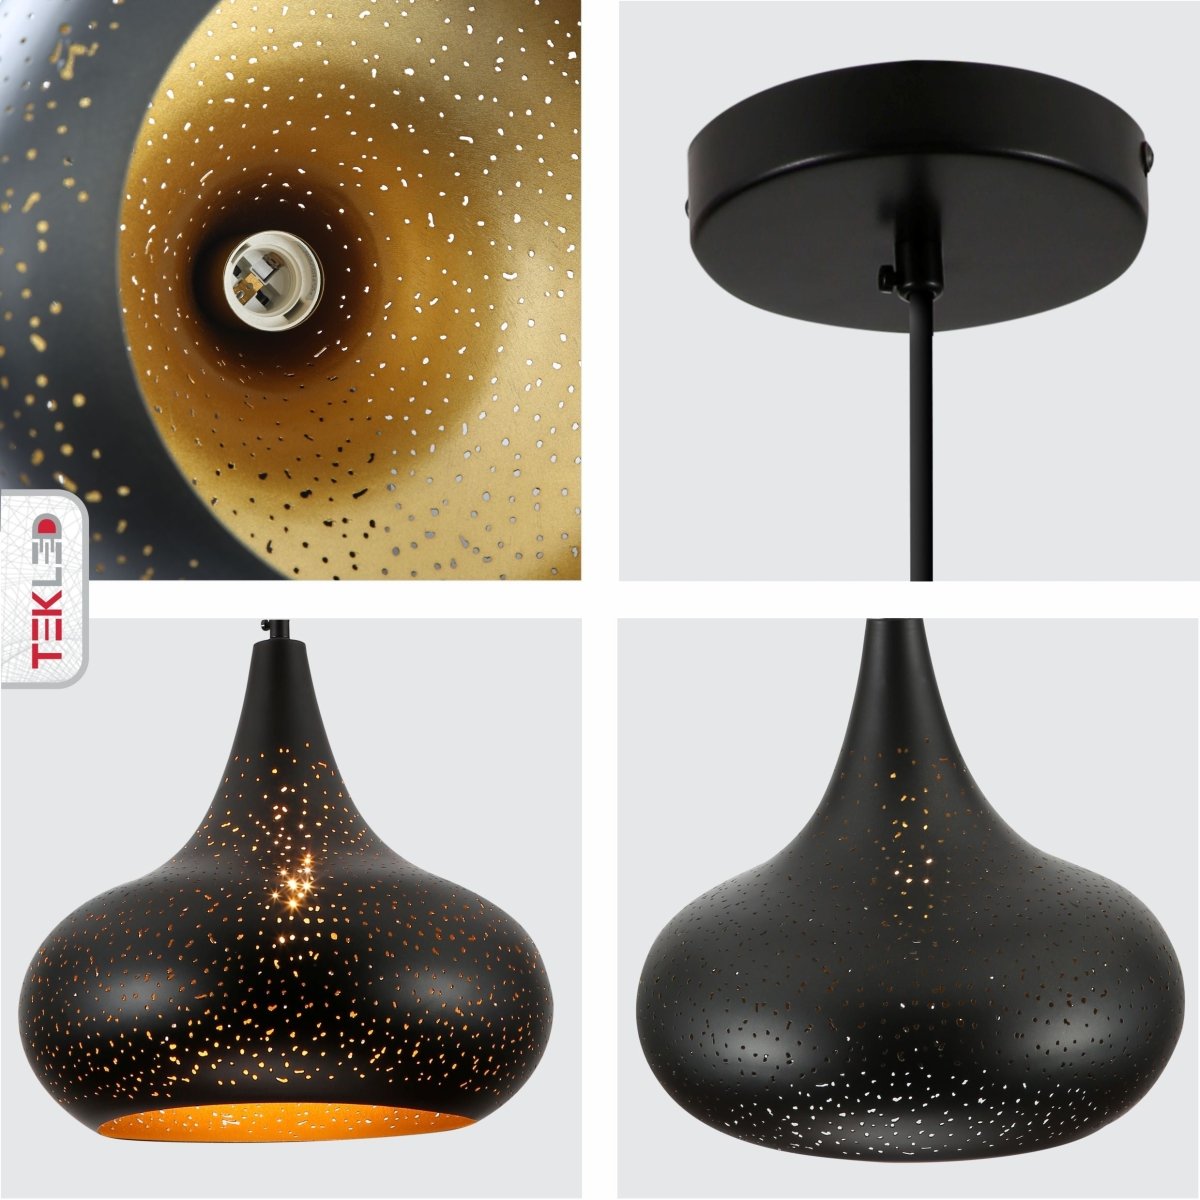 Detailed shots of Black Gold Indian Dome Moroccan Night Milkyway Ceiling Pendant Light with E27 Fitting | TEKLED 150-18384